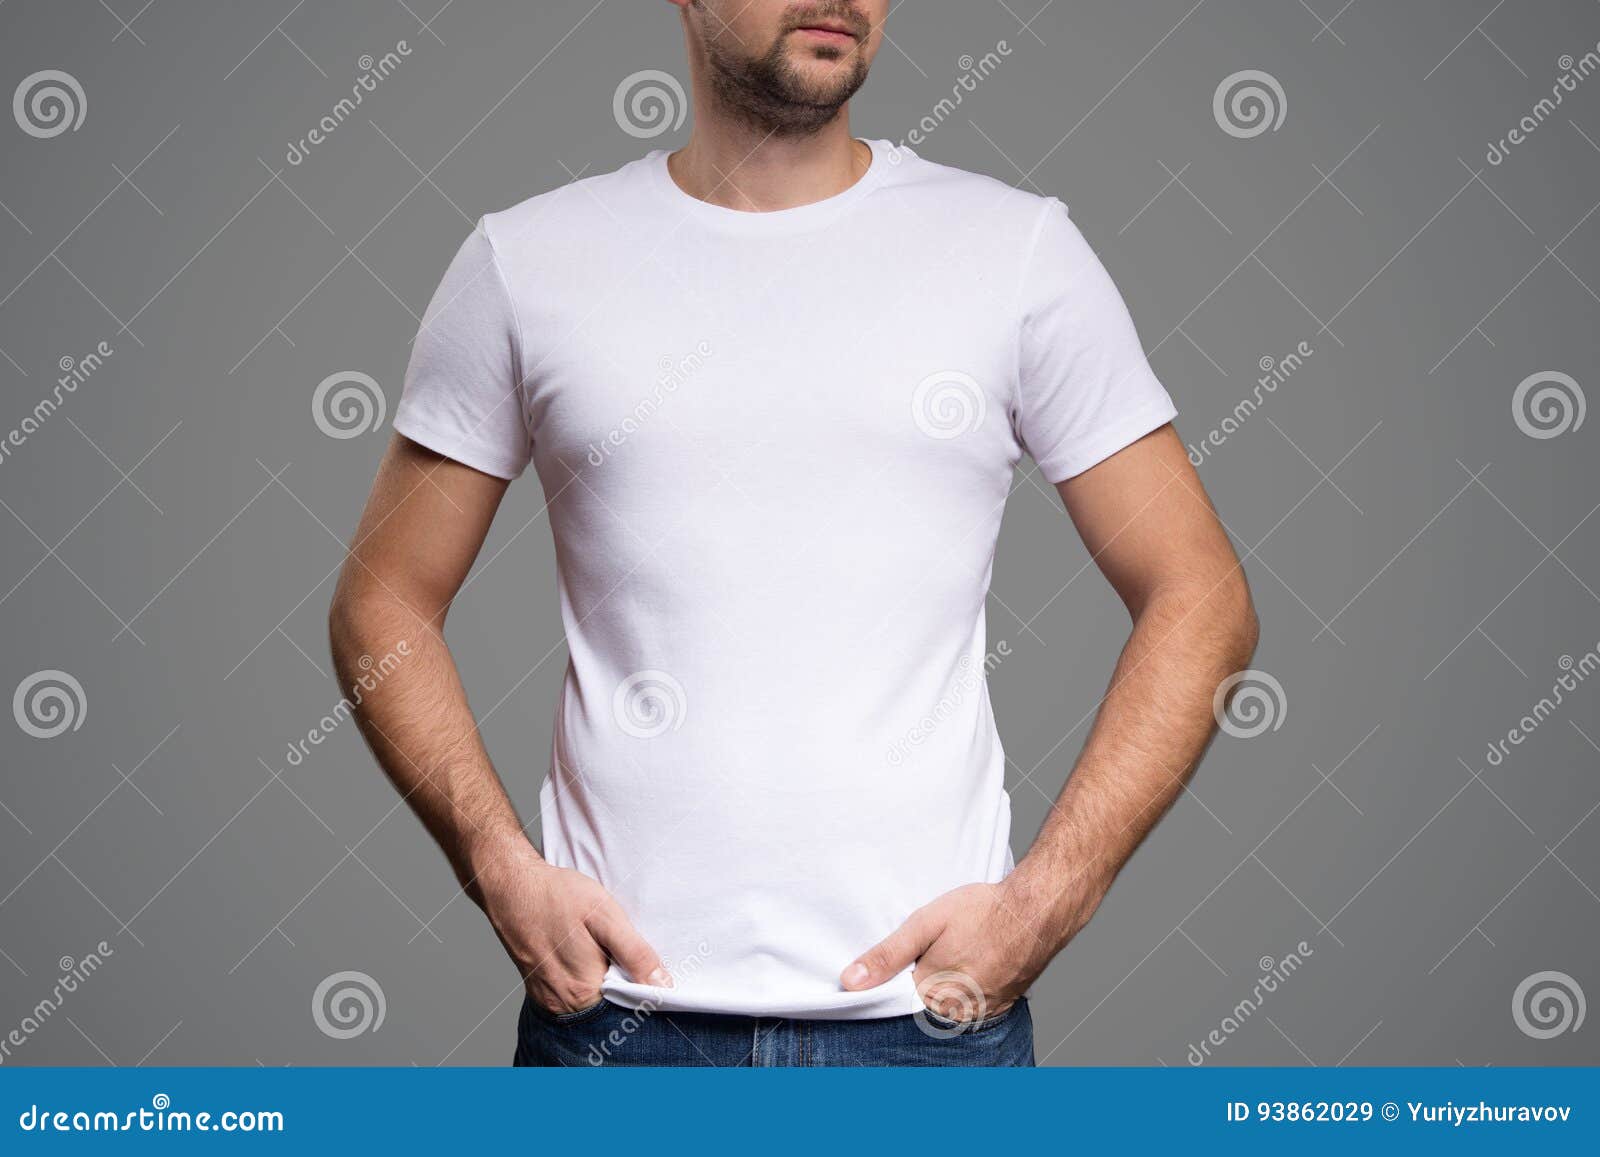 White T-shirt on a Young Man Template. Gray Background. Stock Image ...